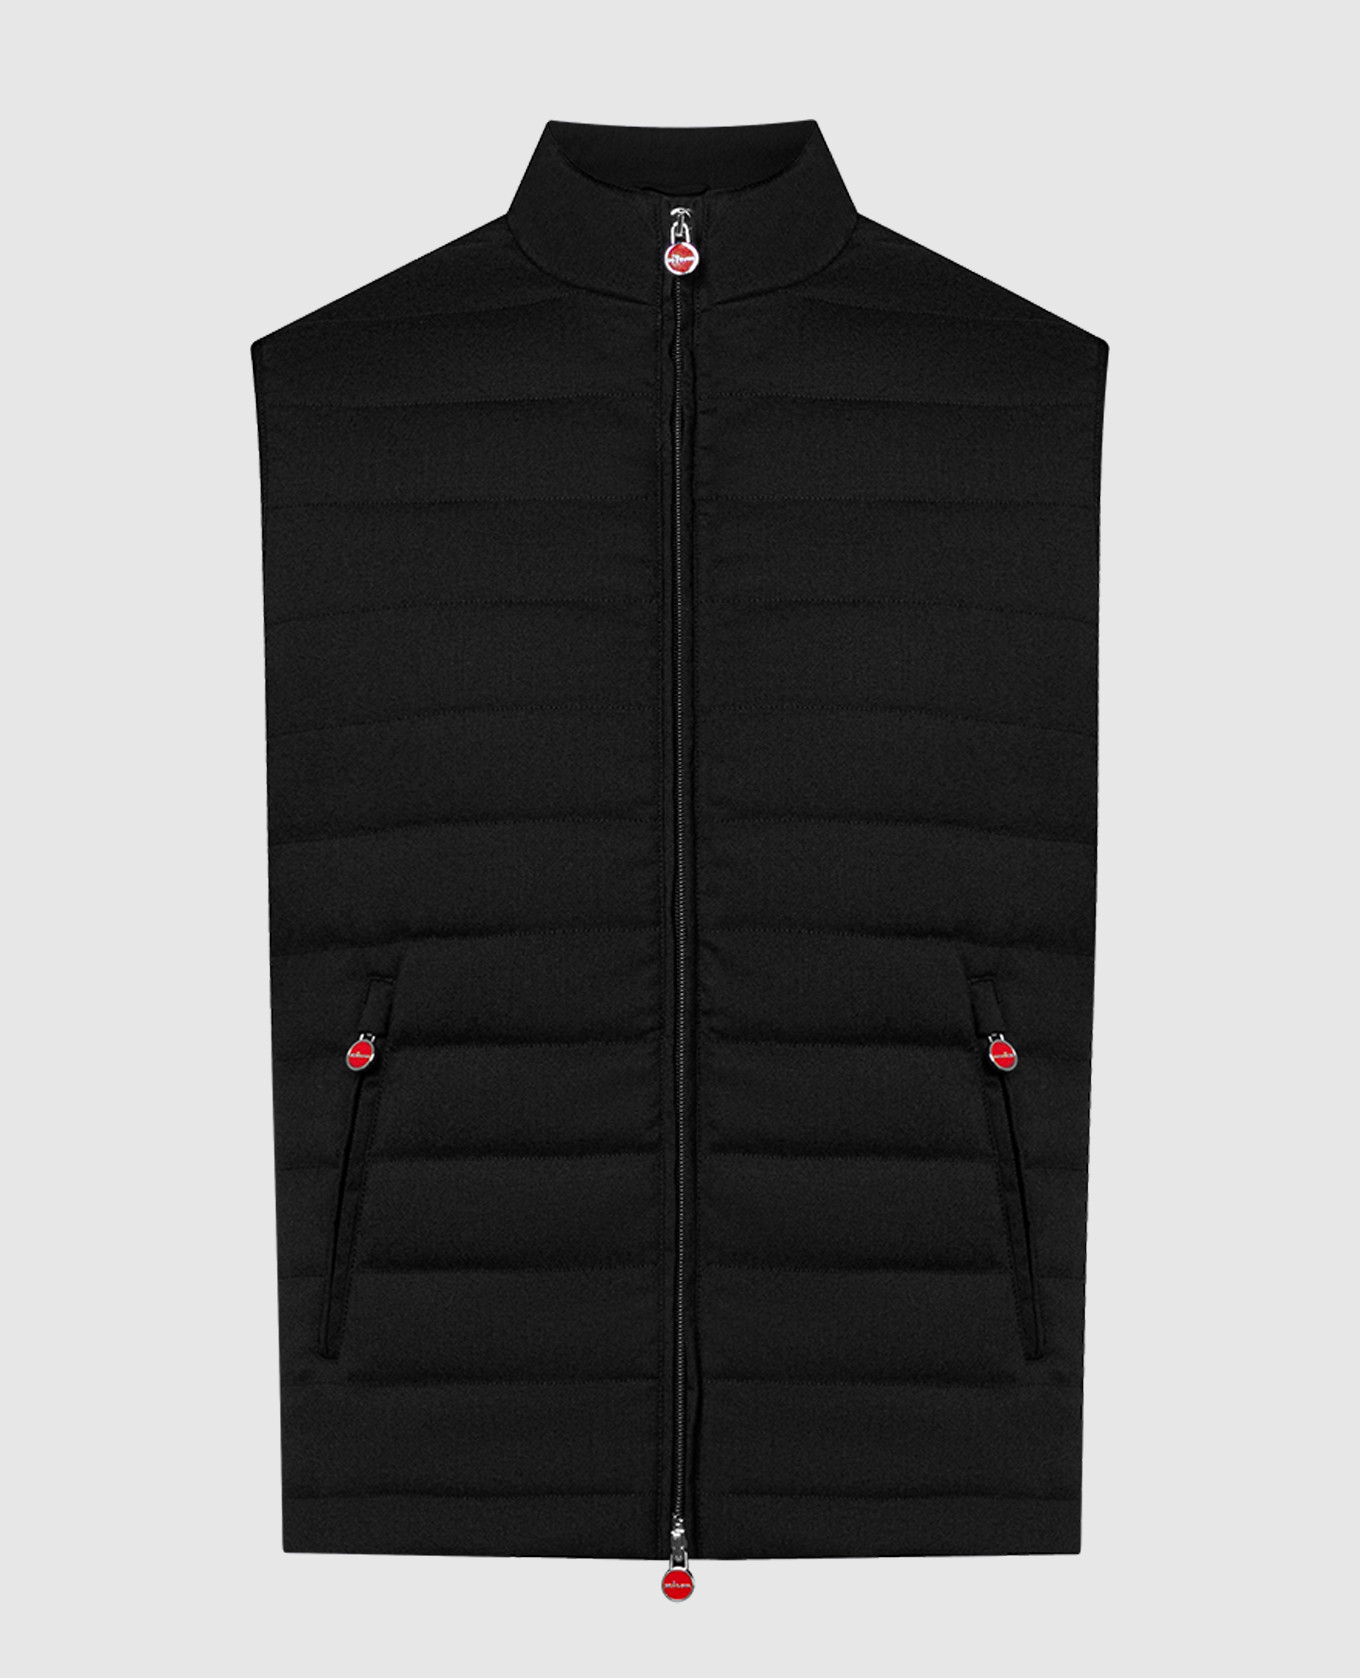 Black quilted vest made of wool